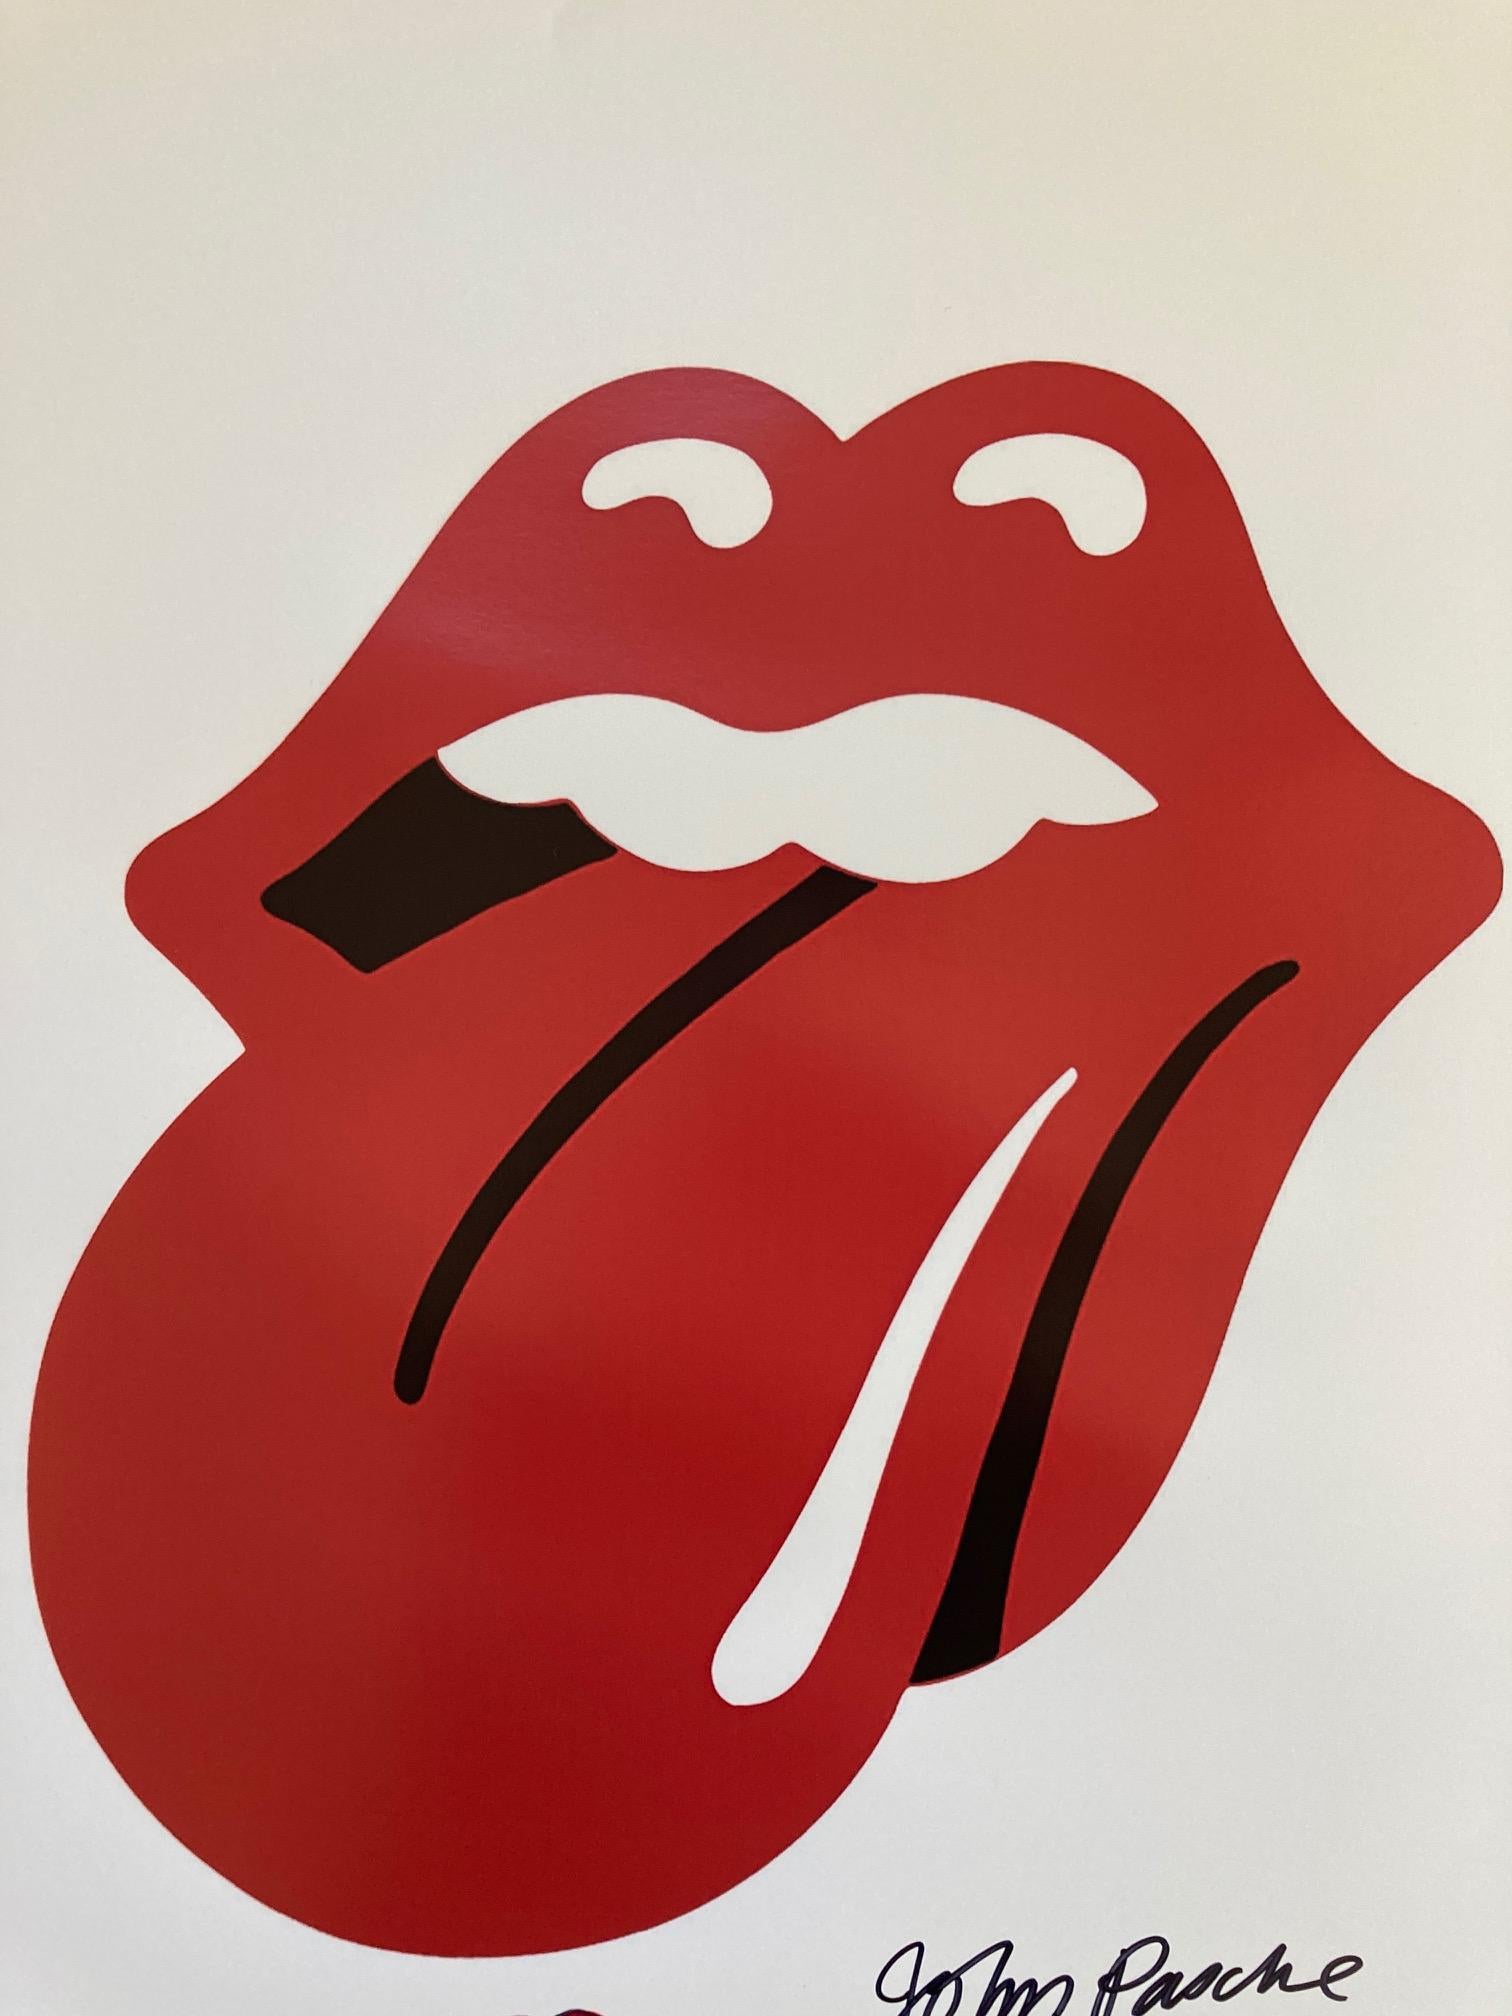 John Pasche (b. 1945)
The Rolling Stones Tongue and Lips, circa 1970
Screenprint in colors on satin wove paper
Signed in ink lower right, with artist hand drawn and colored logo next to his handwritten statement 'I created + designed the Rolling